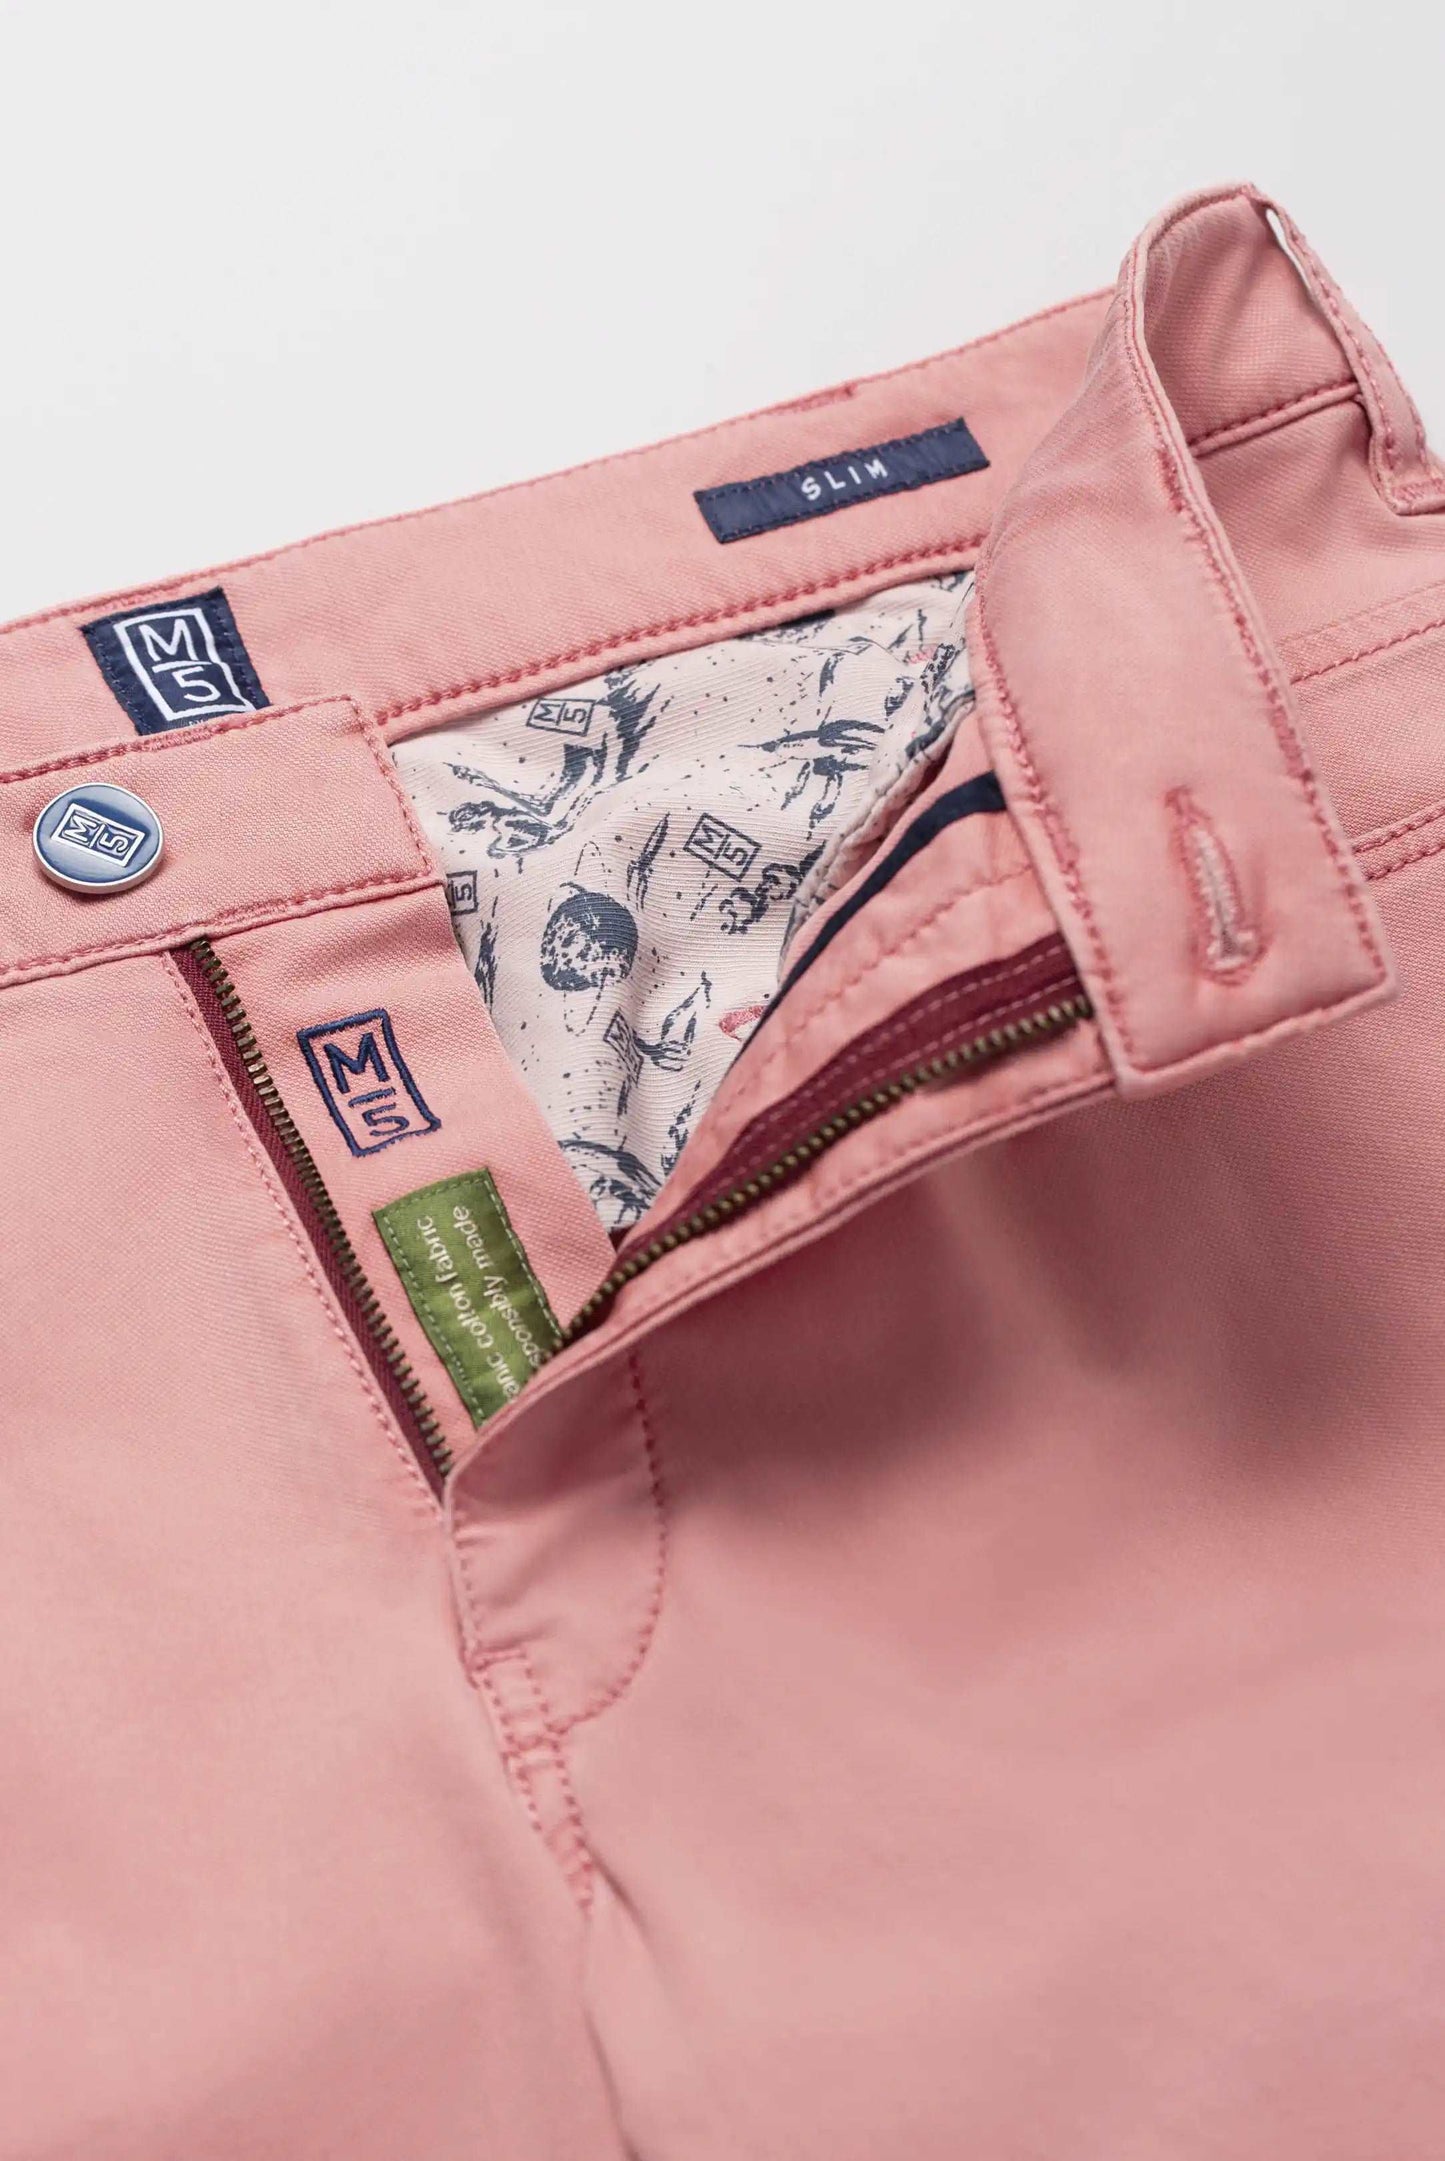 Meyer M5 Super Stretch Jeans Pink Folded Front cropped to show inside trim 